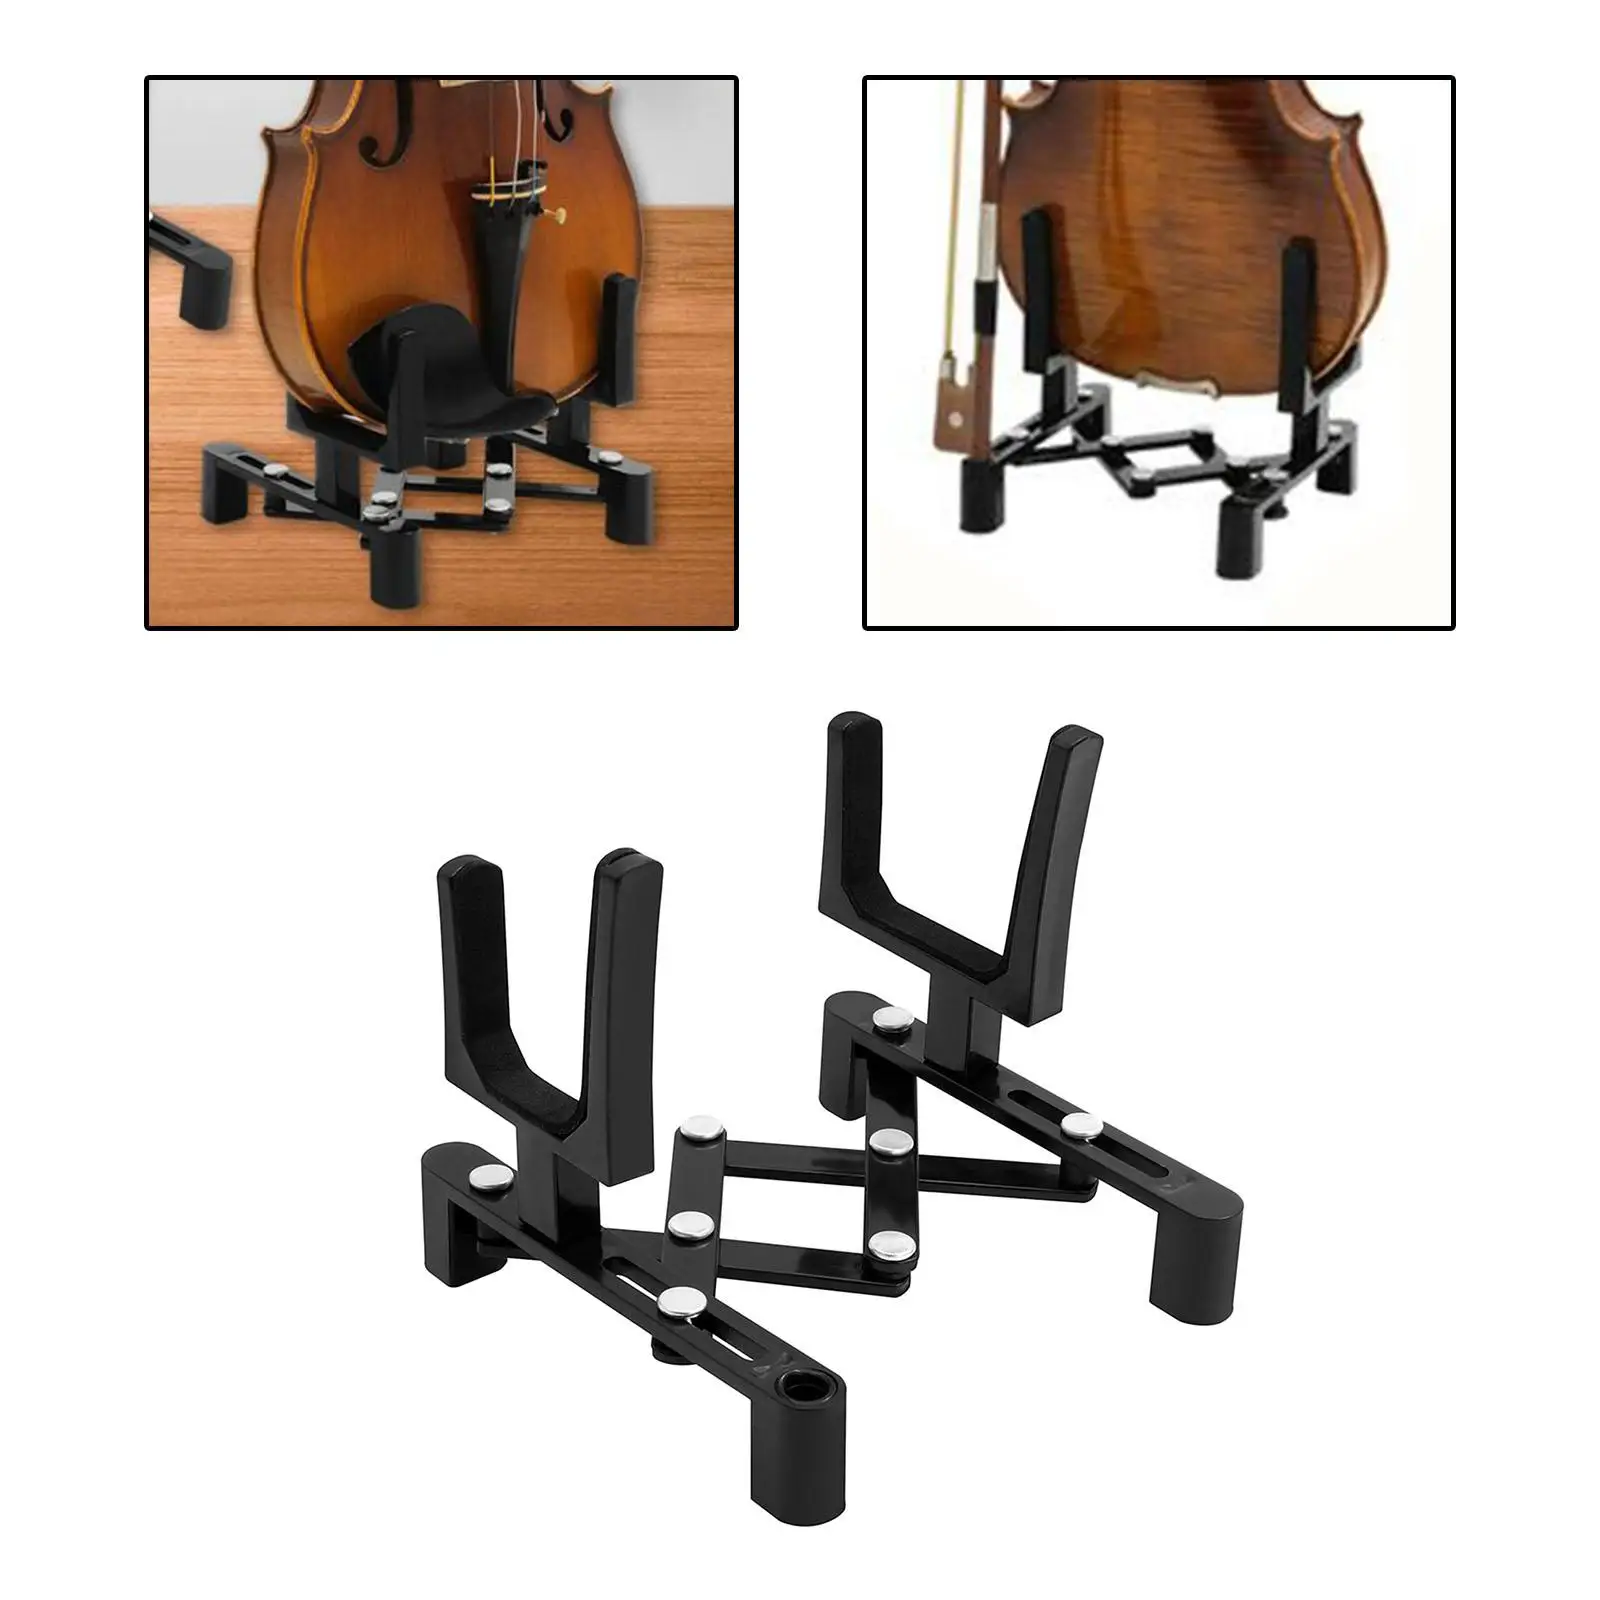 Foldable Violin Stand, Lightweight and Portable, Violin Holder, with Padded Foam, Floor Stand Folding  Holder.